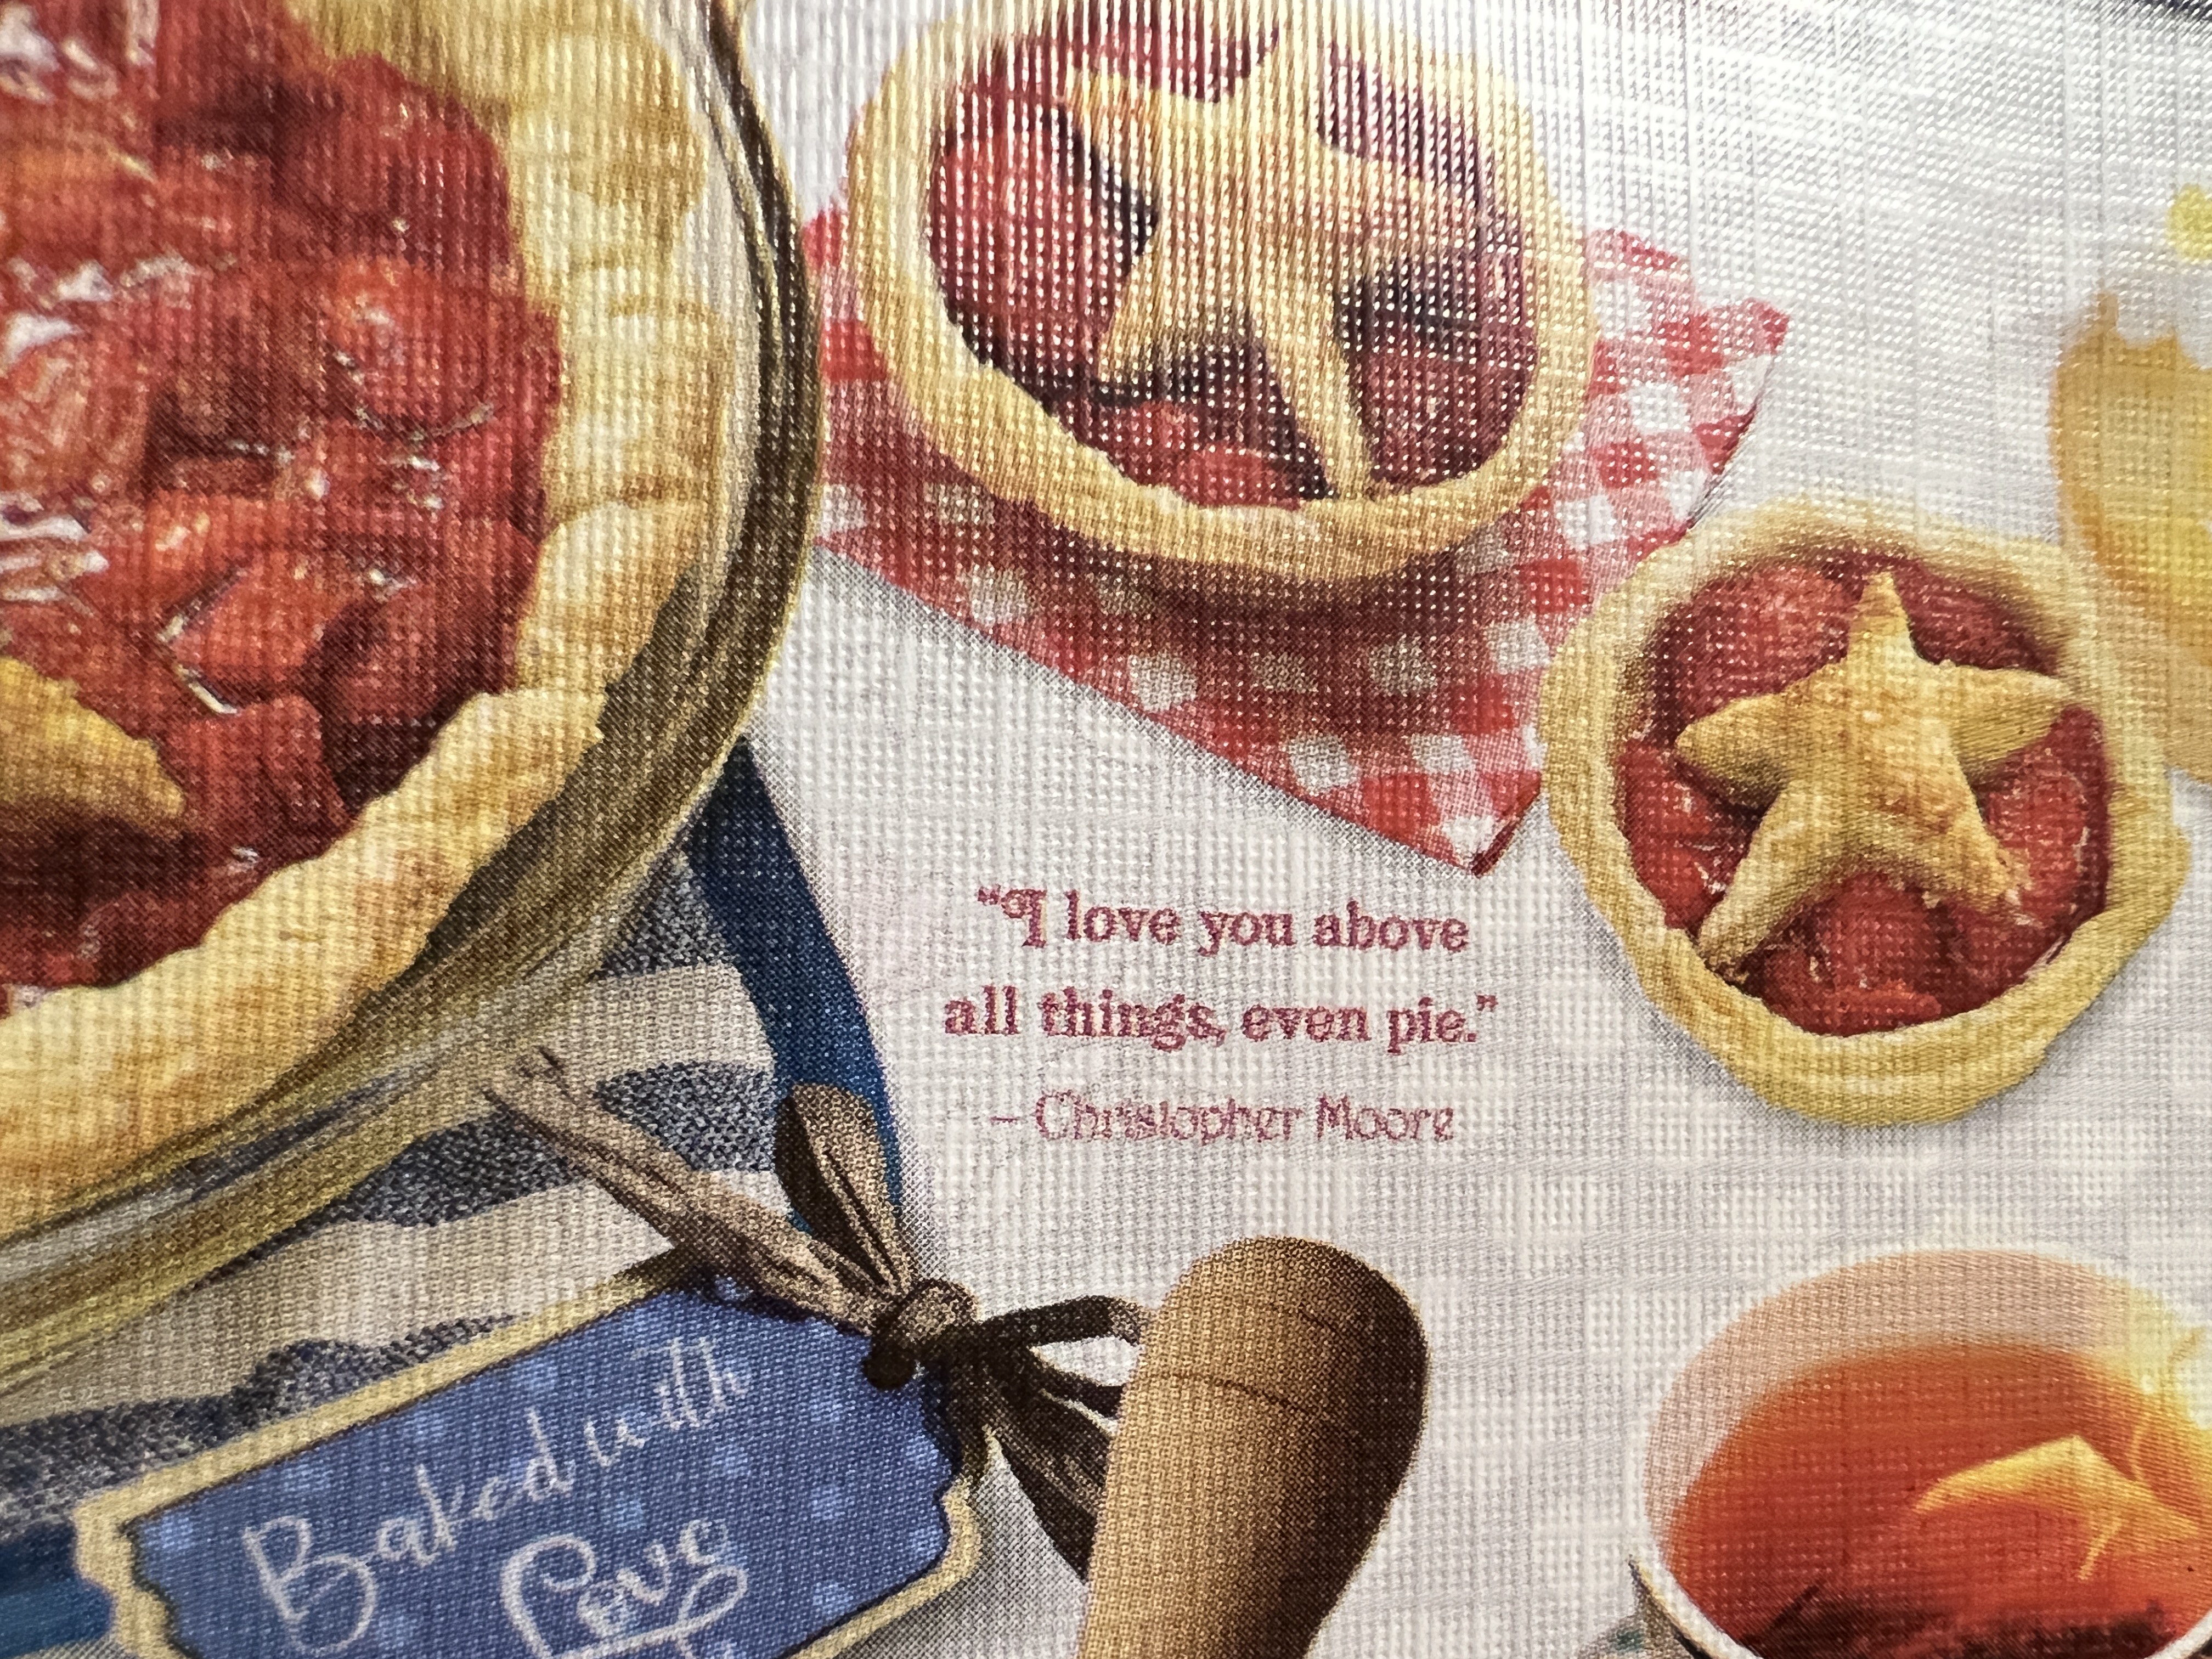 Love, happy, cancer and pie